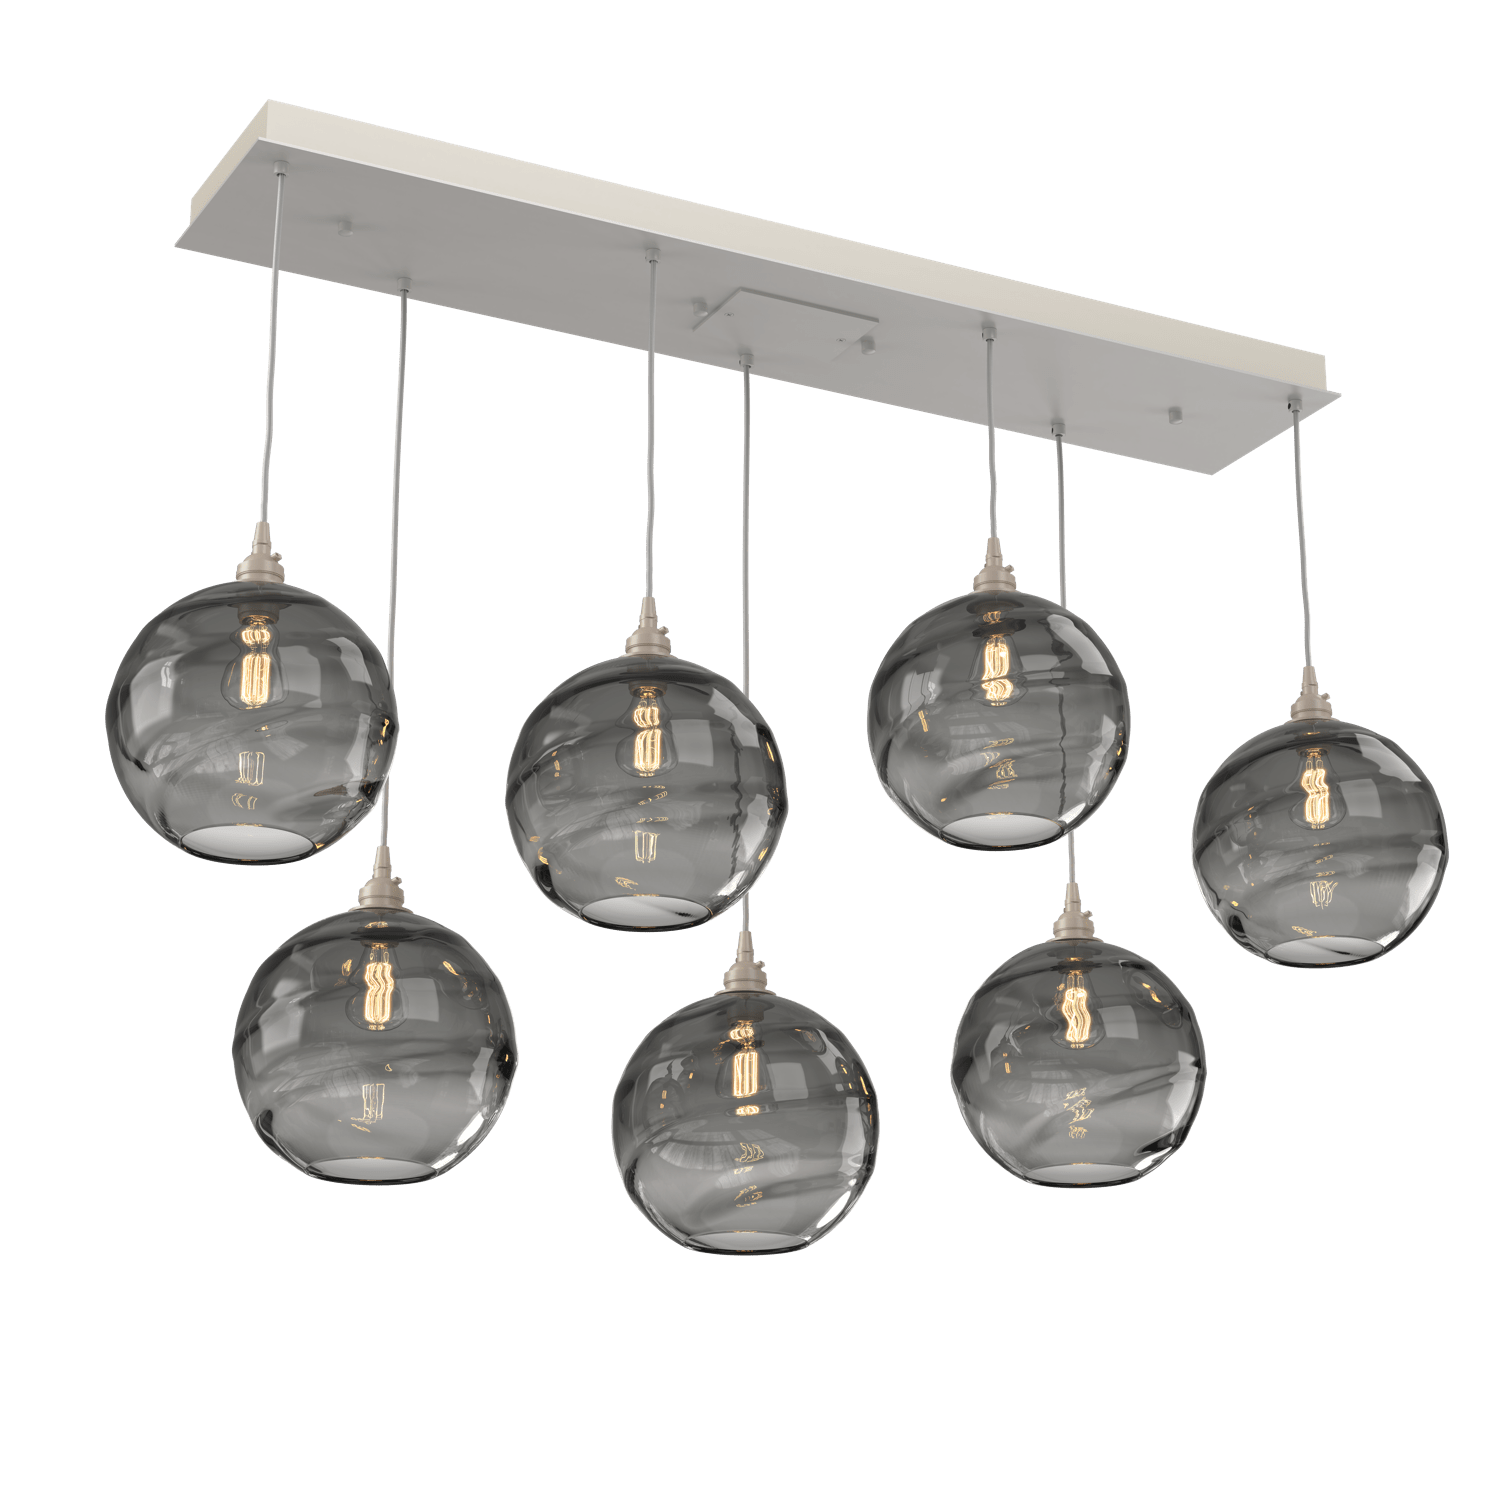 PLB0047-07-BS-OS-Hammerton-Studio-Optic-Blown-Glass-Terra-7-light-linear-pendant-chandelier-with-metallic-beige-silver-finish-and-optic-smoke-blown-glass-shades-and-incandescent-lamping